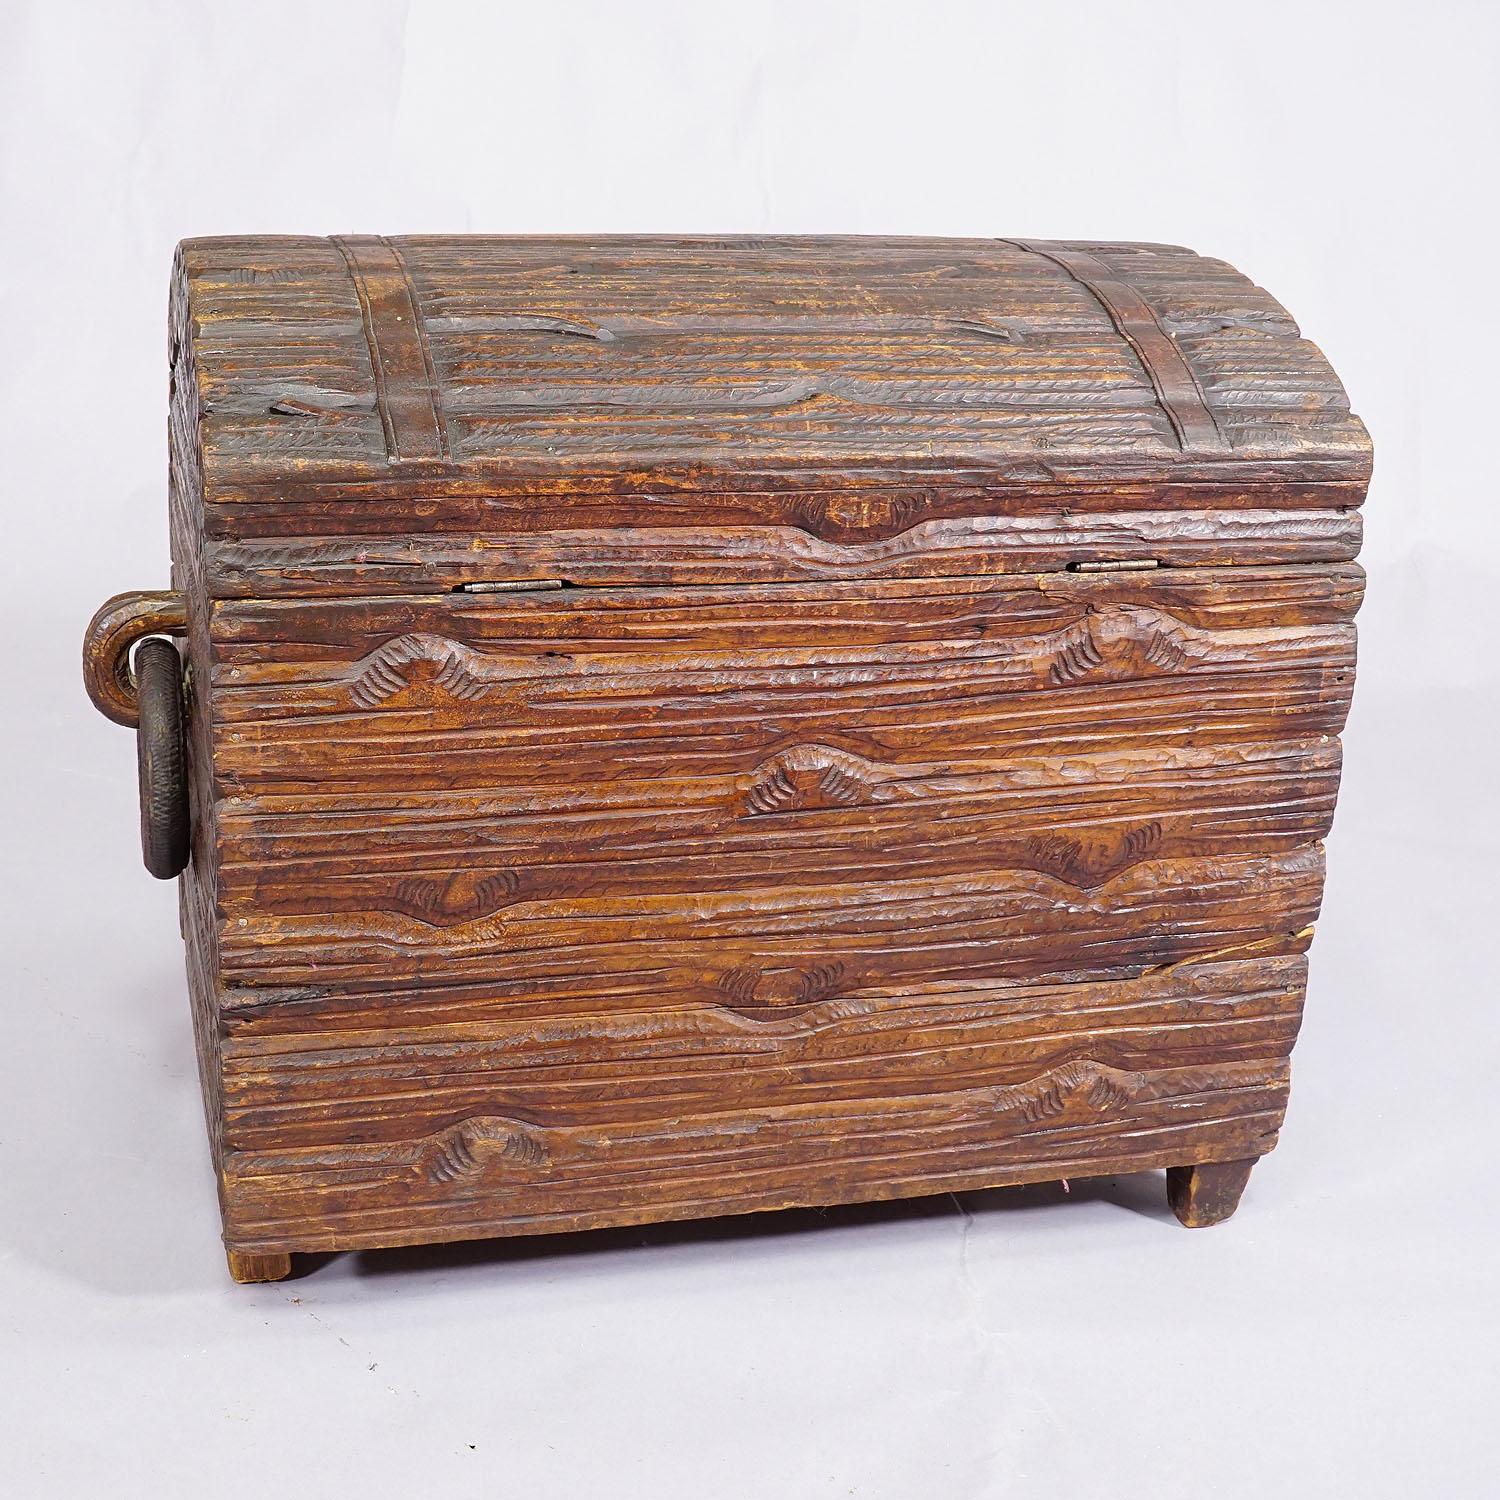 19th Century Wooden Carved Black Forest Log Box Modelled as Piled Stack of Logs For Sale